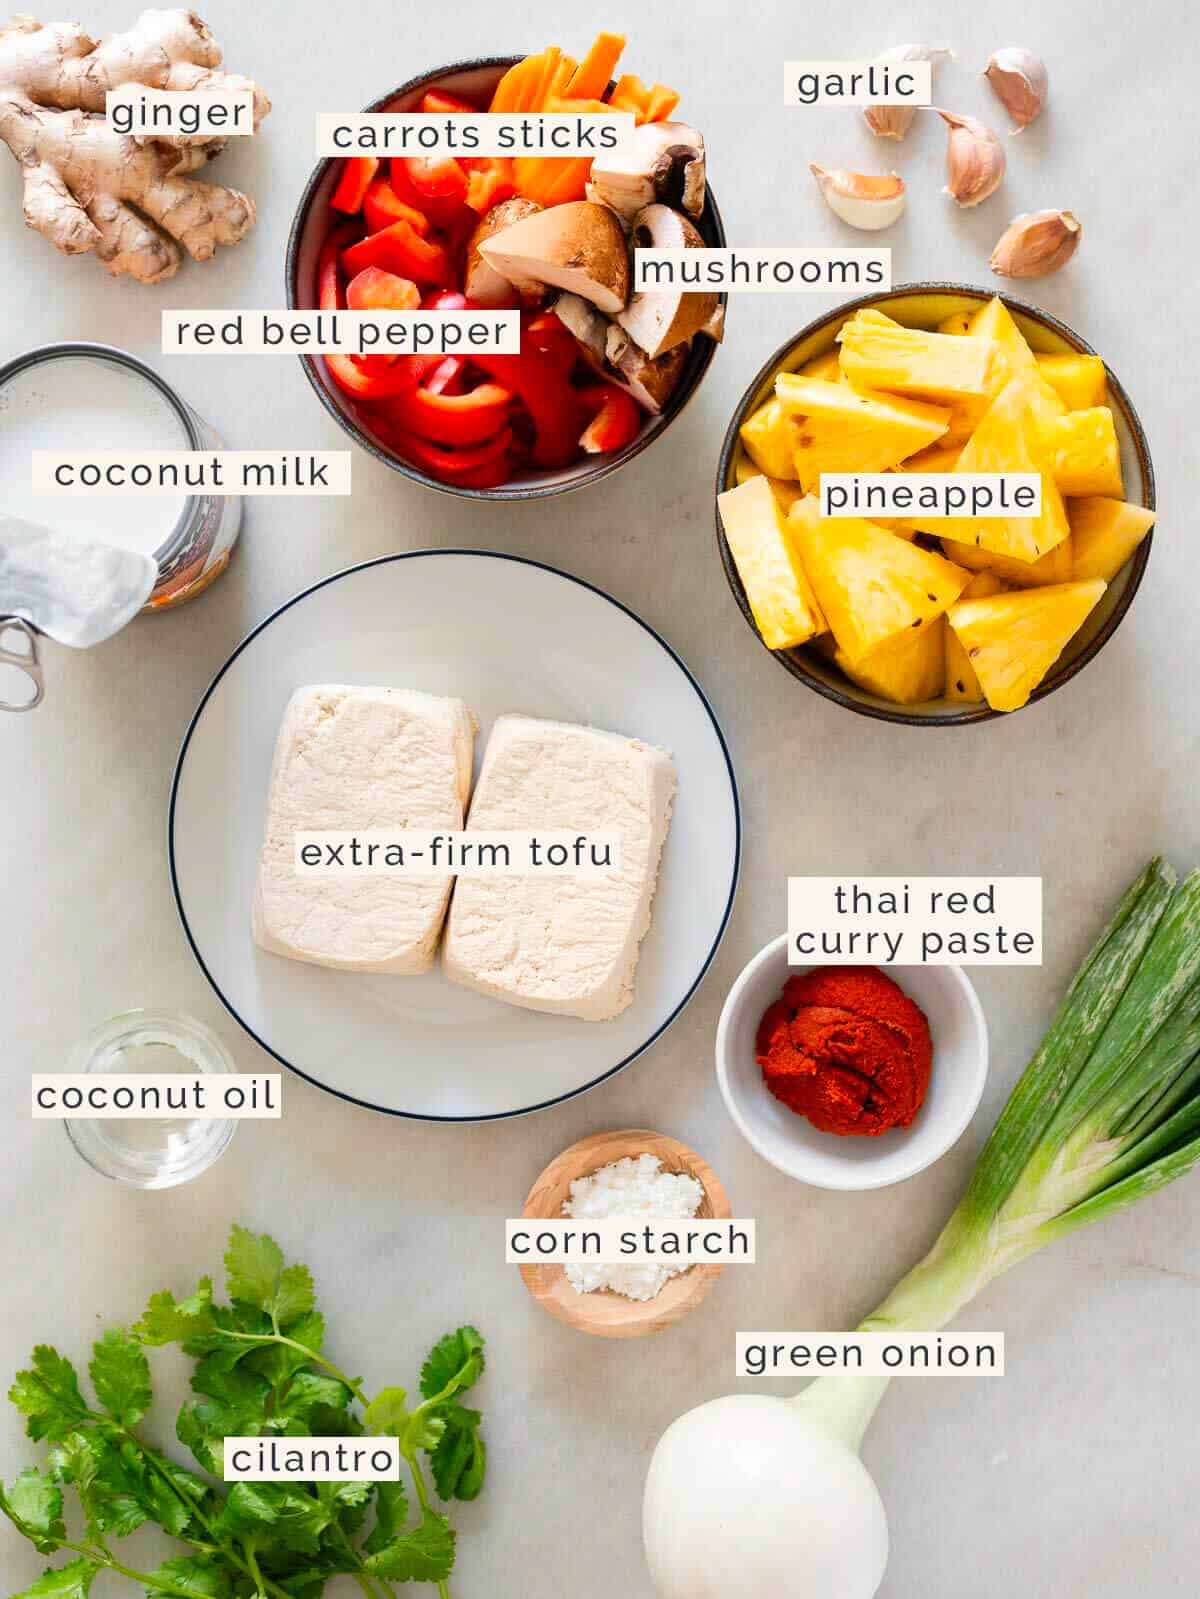 ingredients to make a coconut pineapple Thai curry.